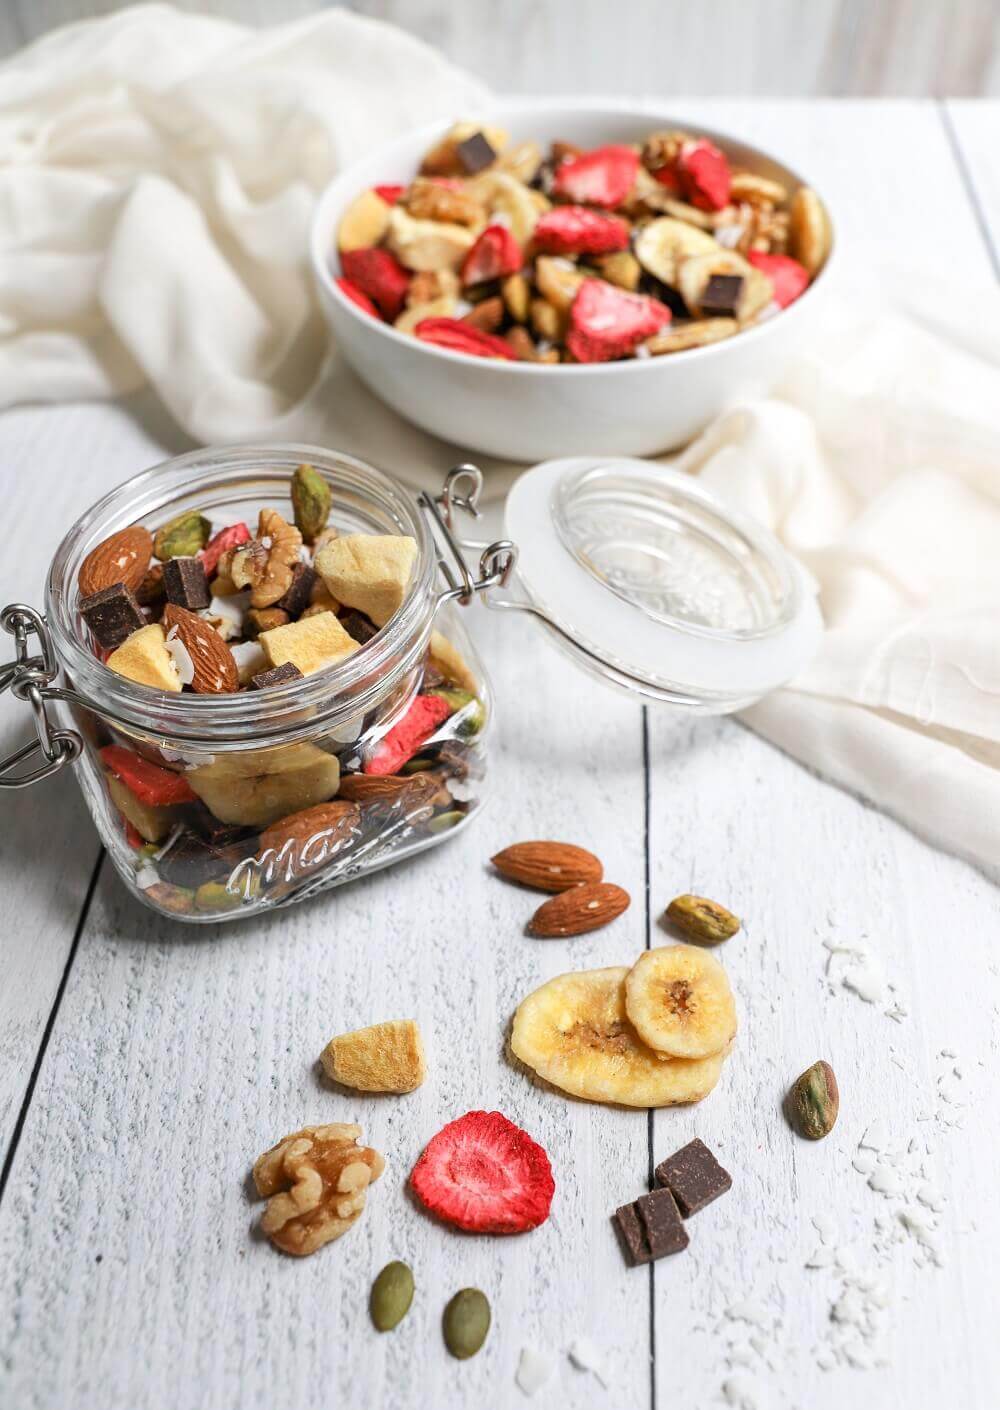 Easy School Lunch Ideas: Homemade Trail Mix